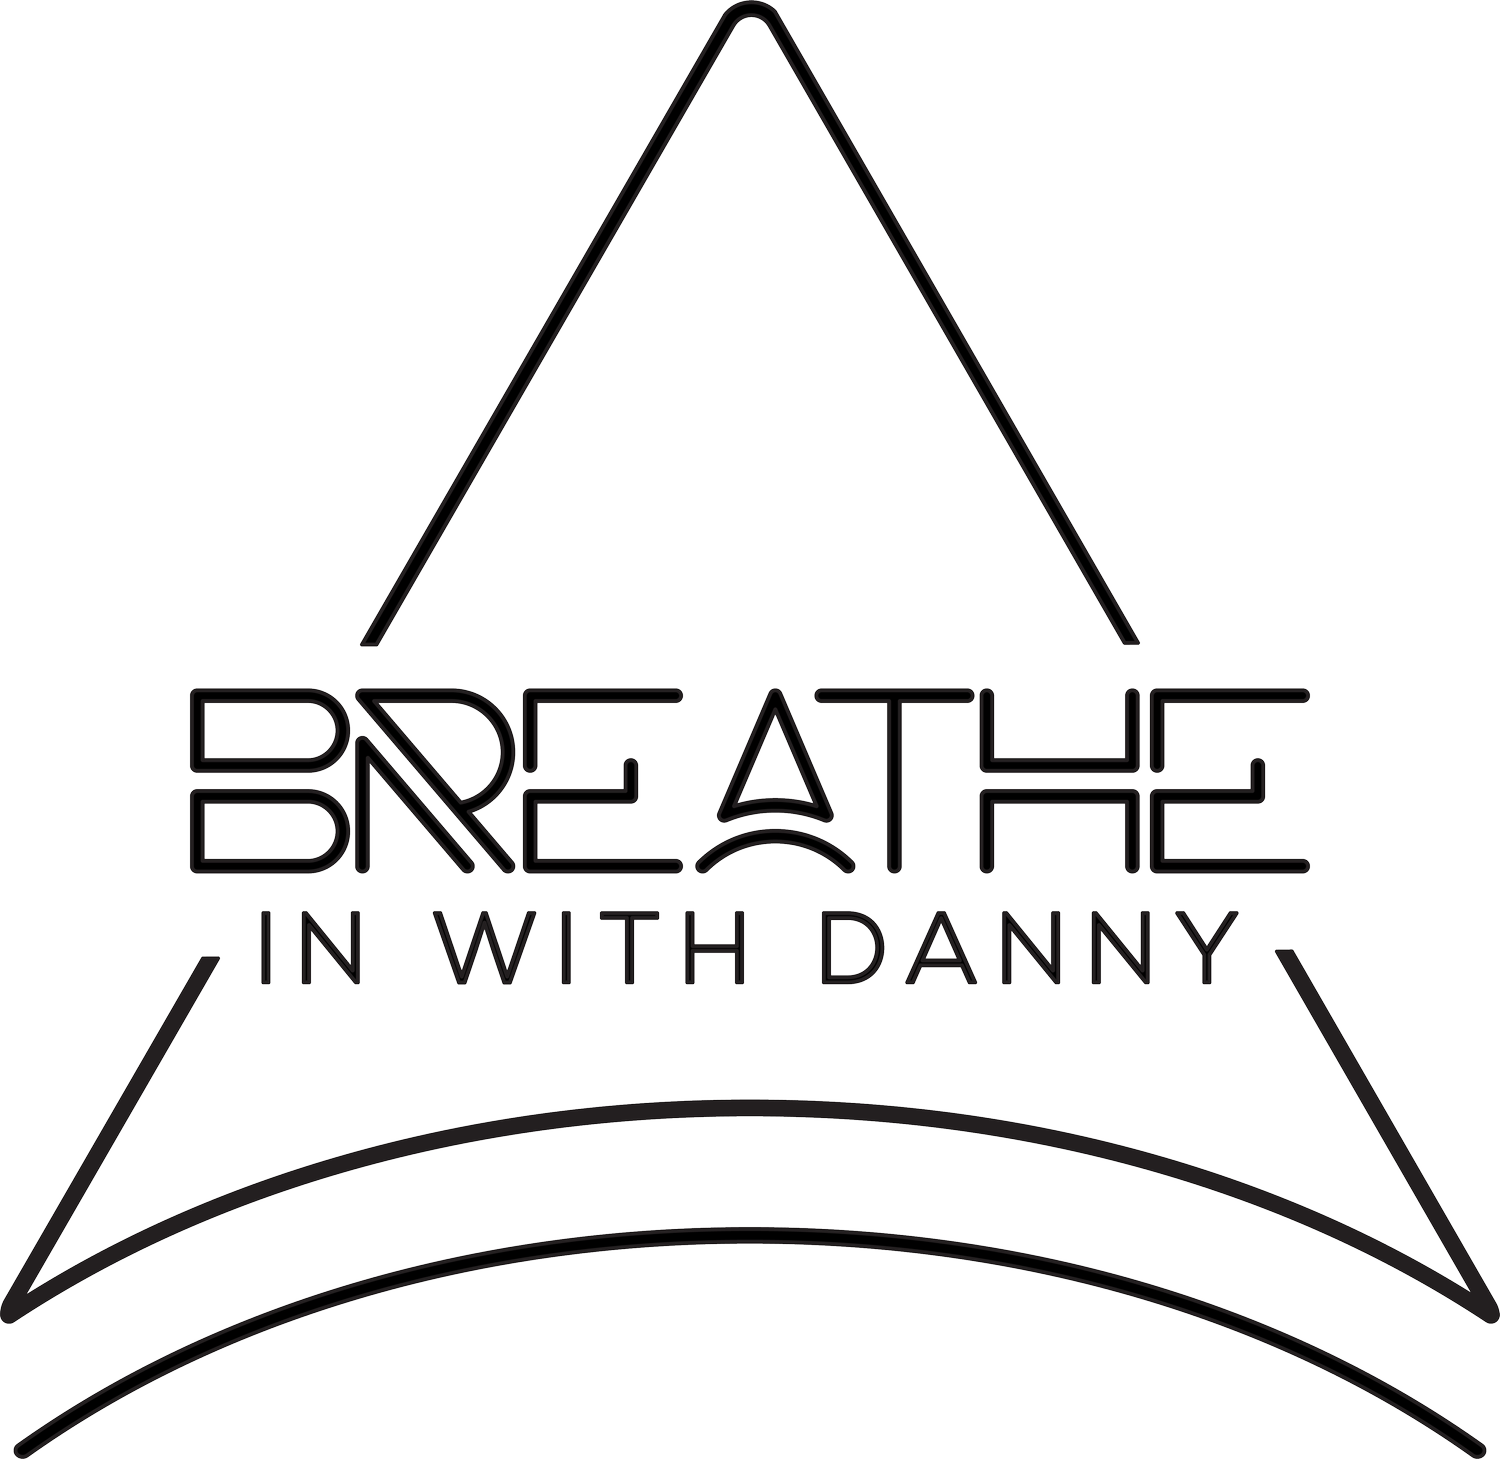 Breathe In With Danny